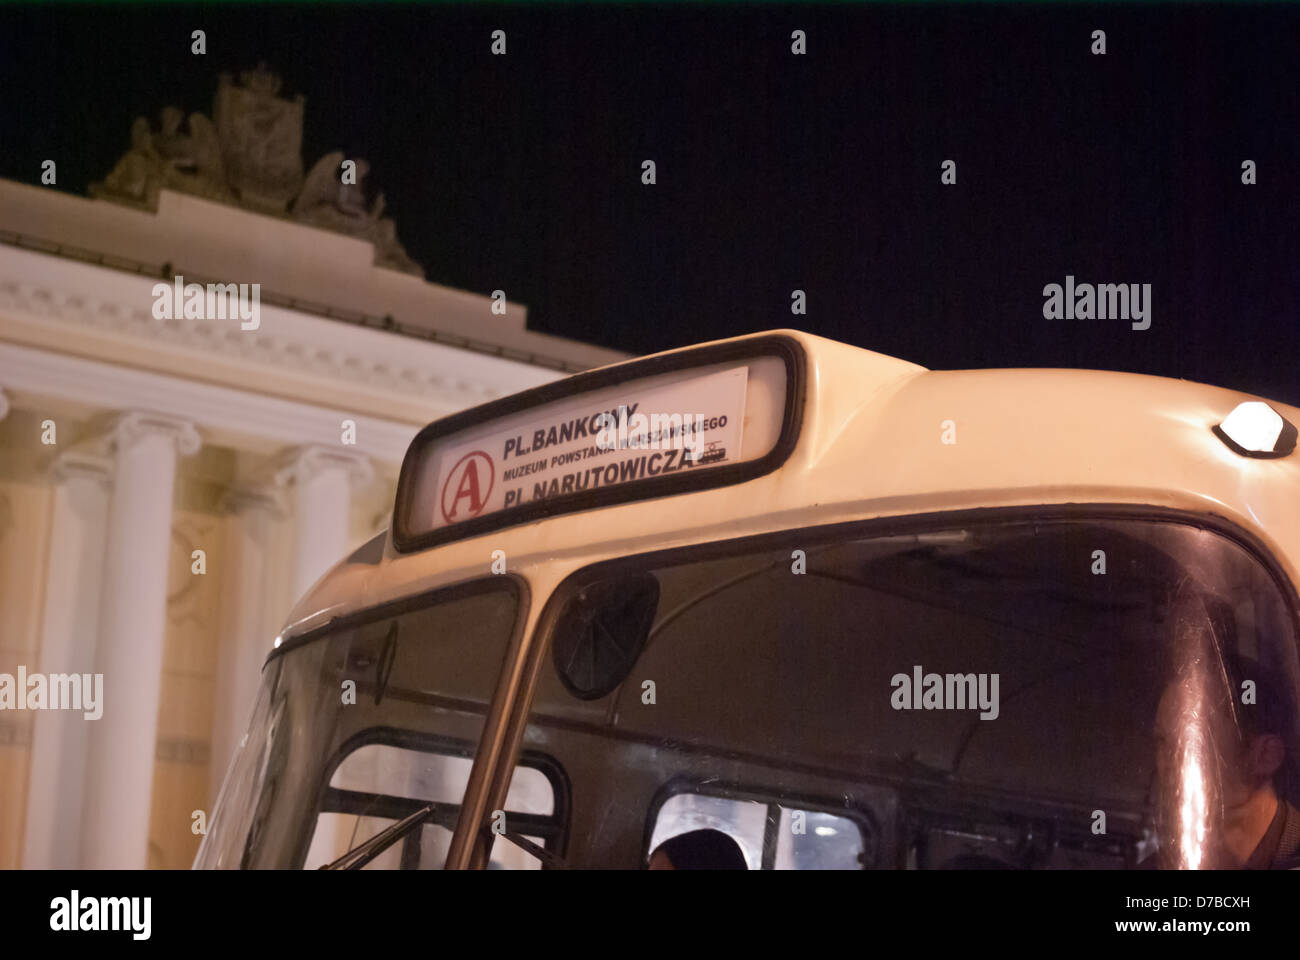 Vintage city bus (detail) near Warsaw City Hall with Warsaw coat of arm visible in bg, taken in the night Plac Bankowy, Warsaw Stock Photo